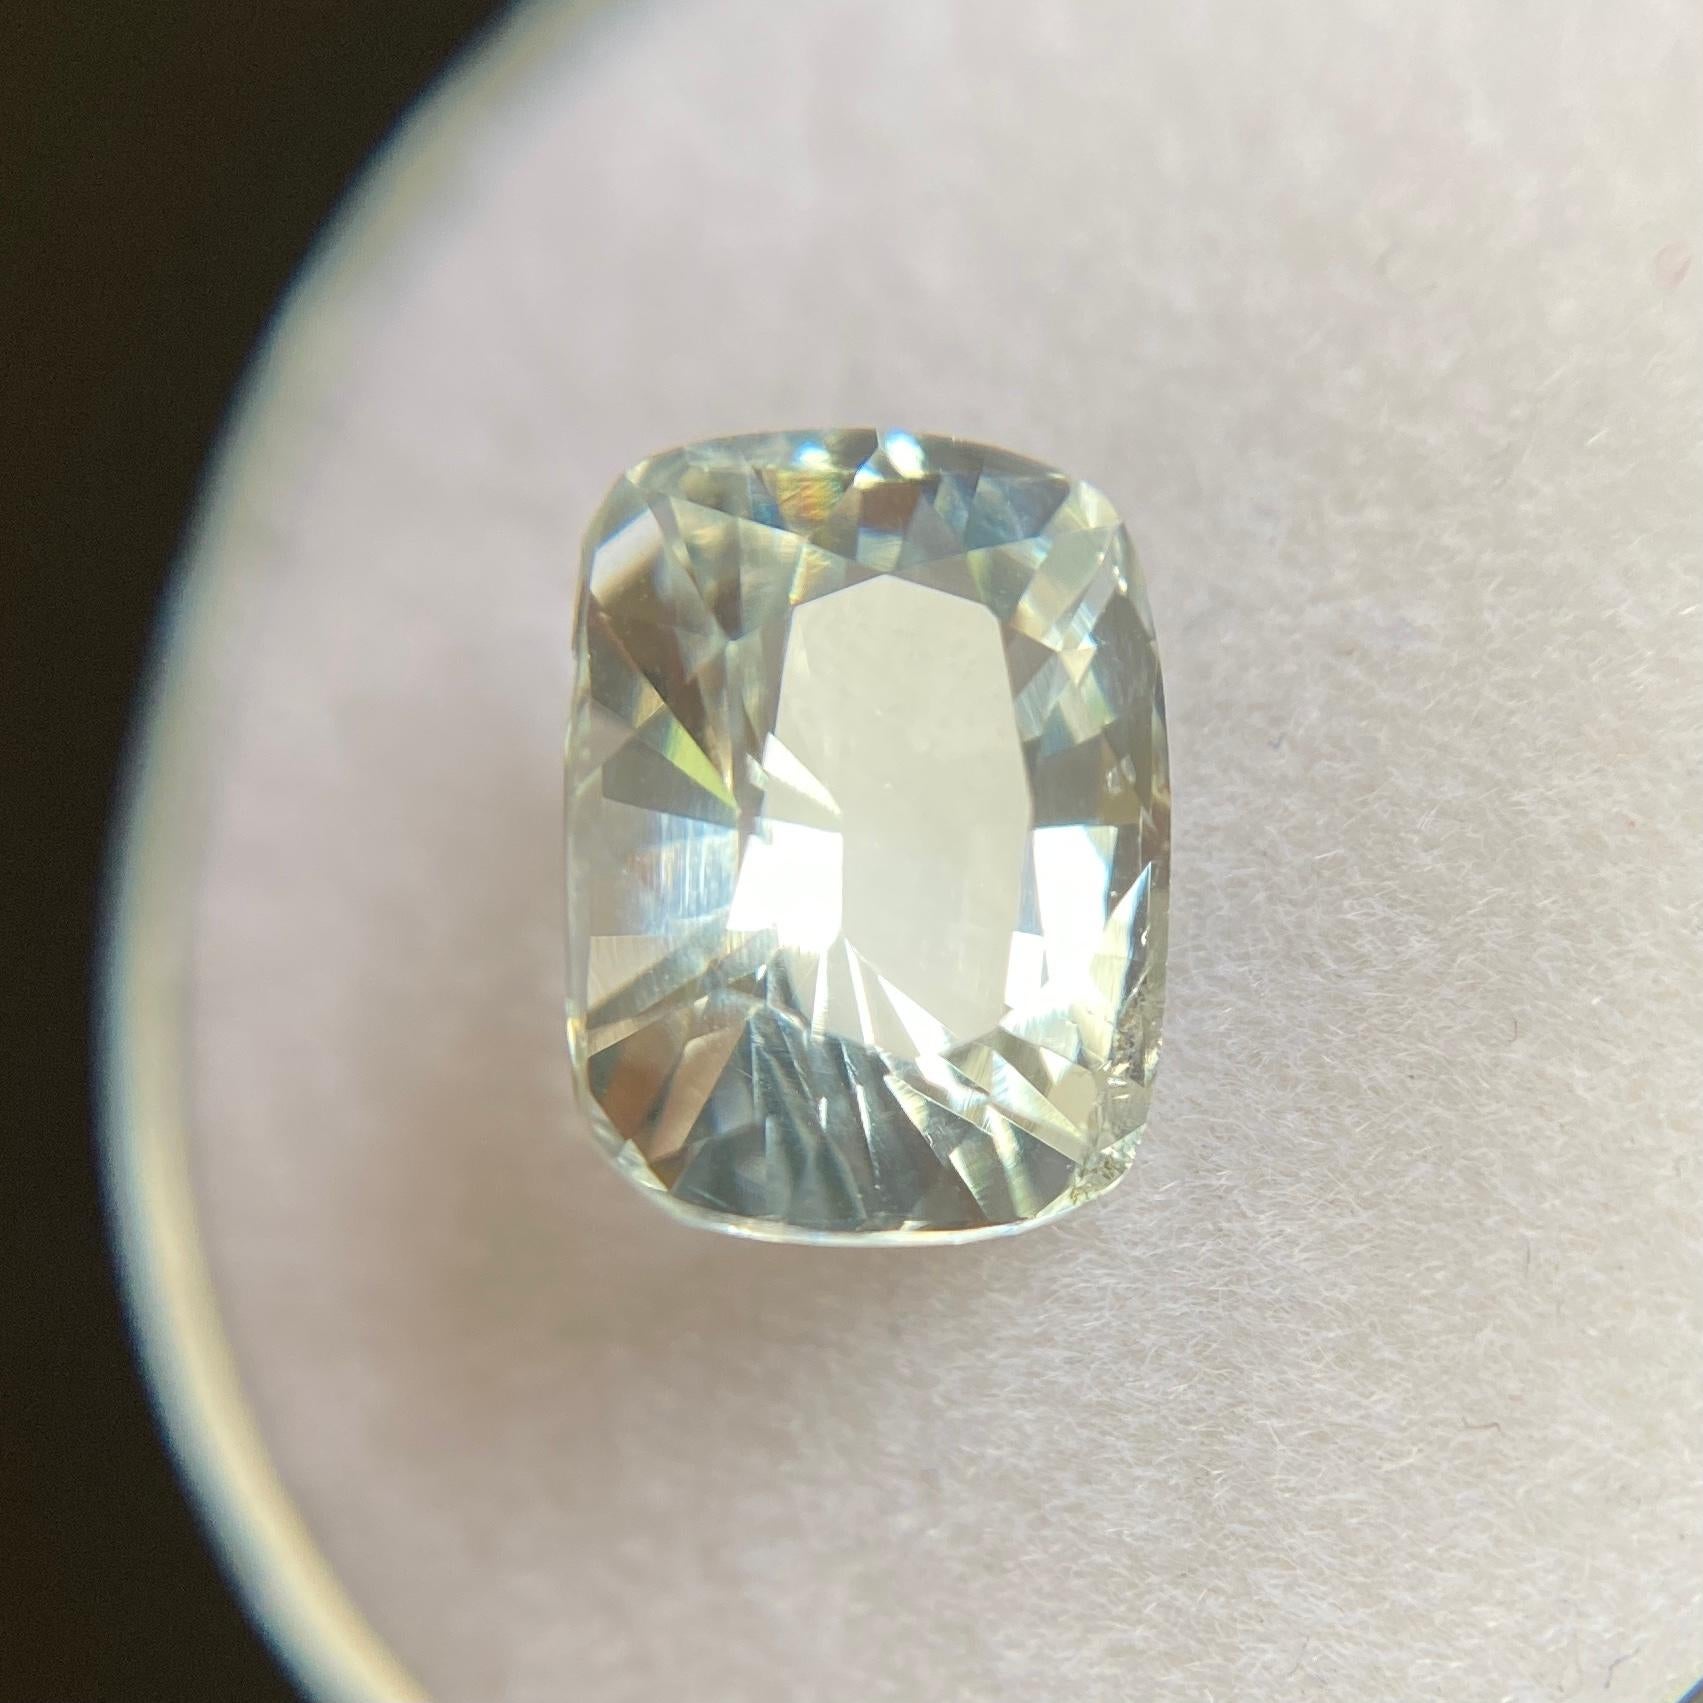 Natural Light Blue Aquamarine Gemstone.

2.72 Carat with a light blue colour and very good clarity. Very clean gem with only some small natural inclusions visible when looking closely.

Also has an excellent cushion cut with ideal polish to show